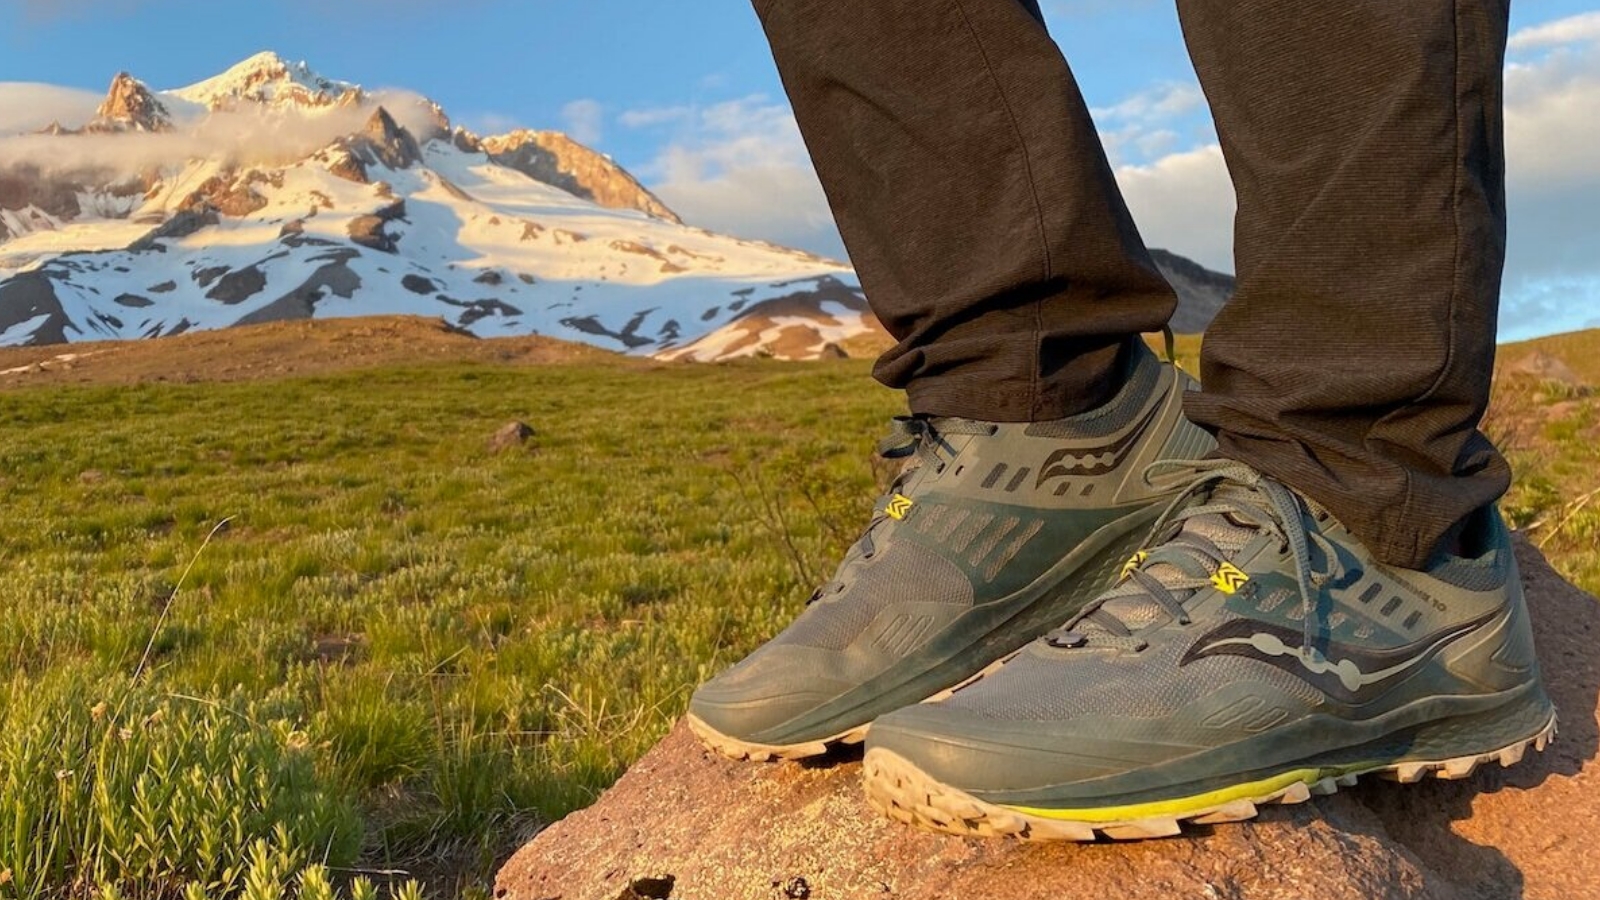 Closeup of the Saucony Peregrine 13 shoes in front of Mt. Hood